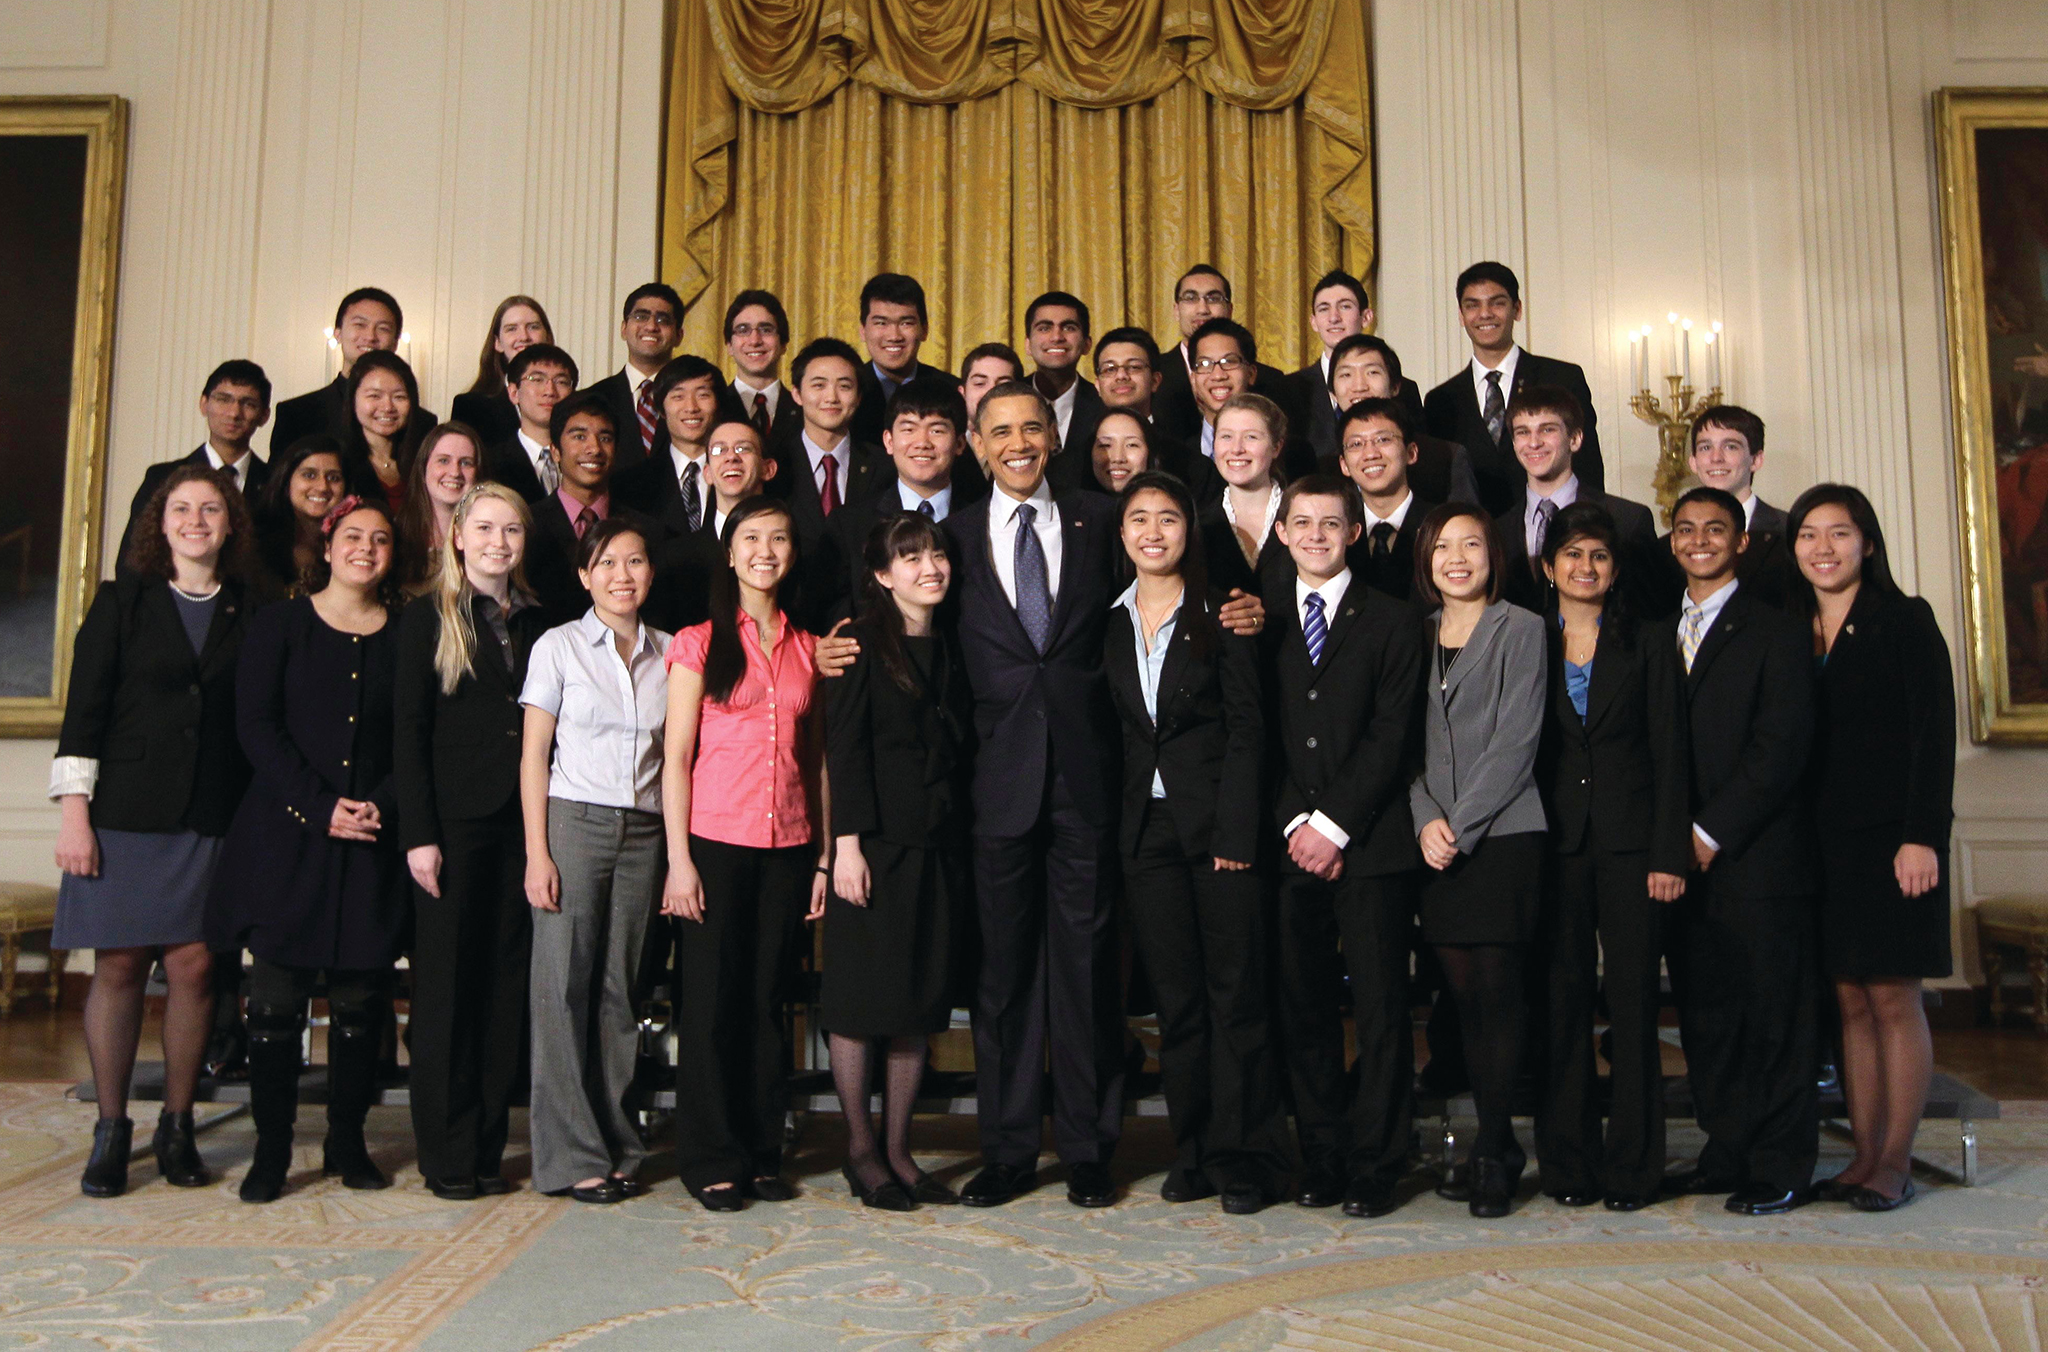 STS finalists pose with President Obama